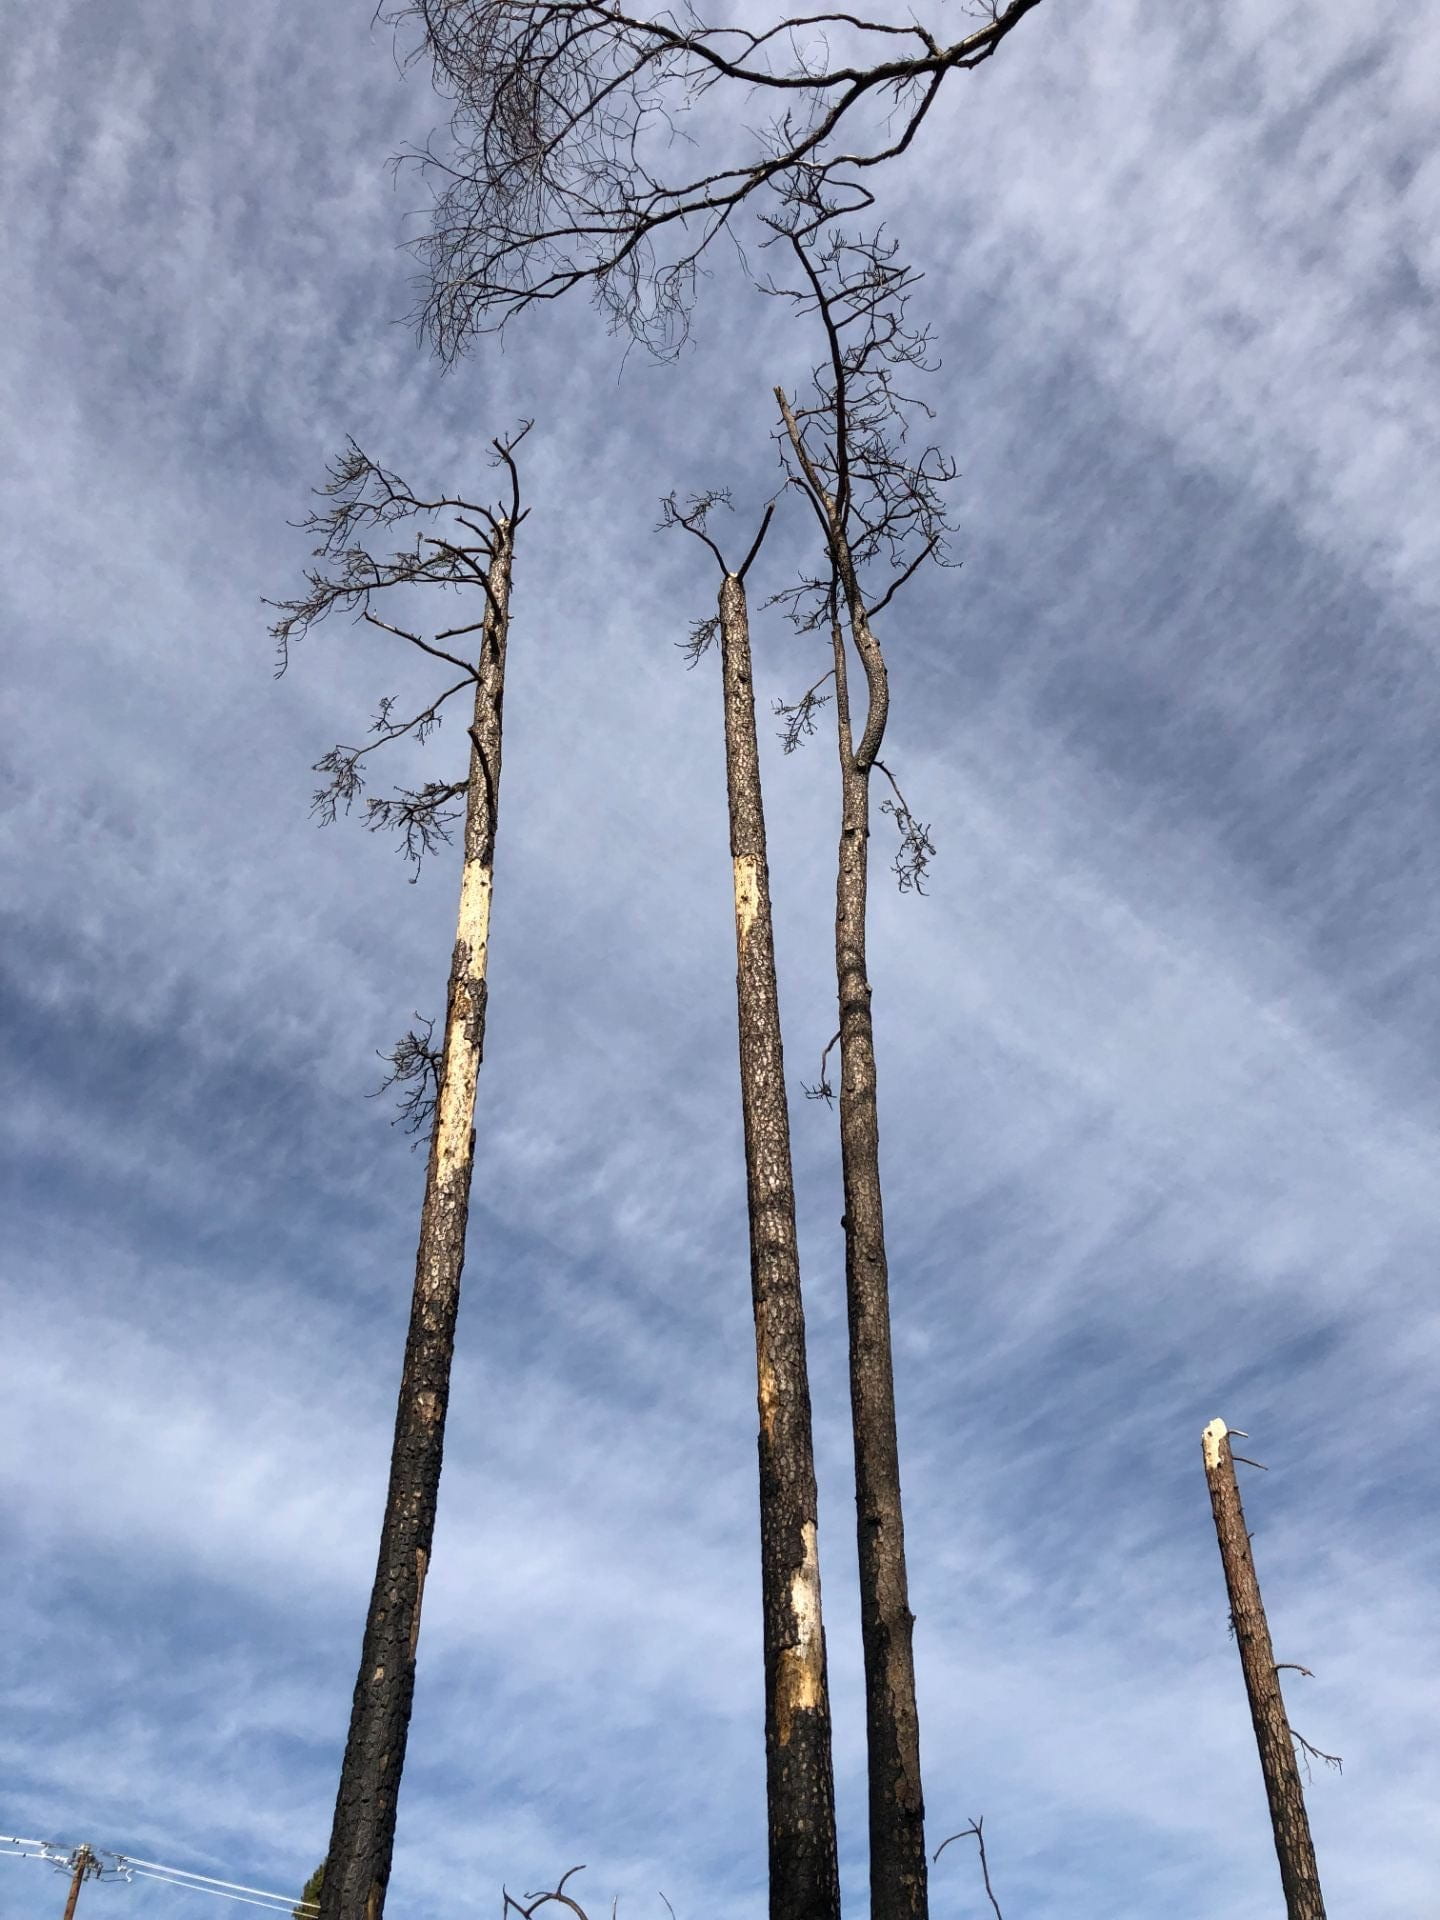 Burned trees are framed against cloudy blue sky